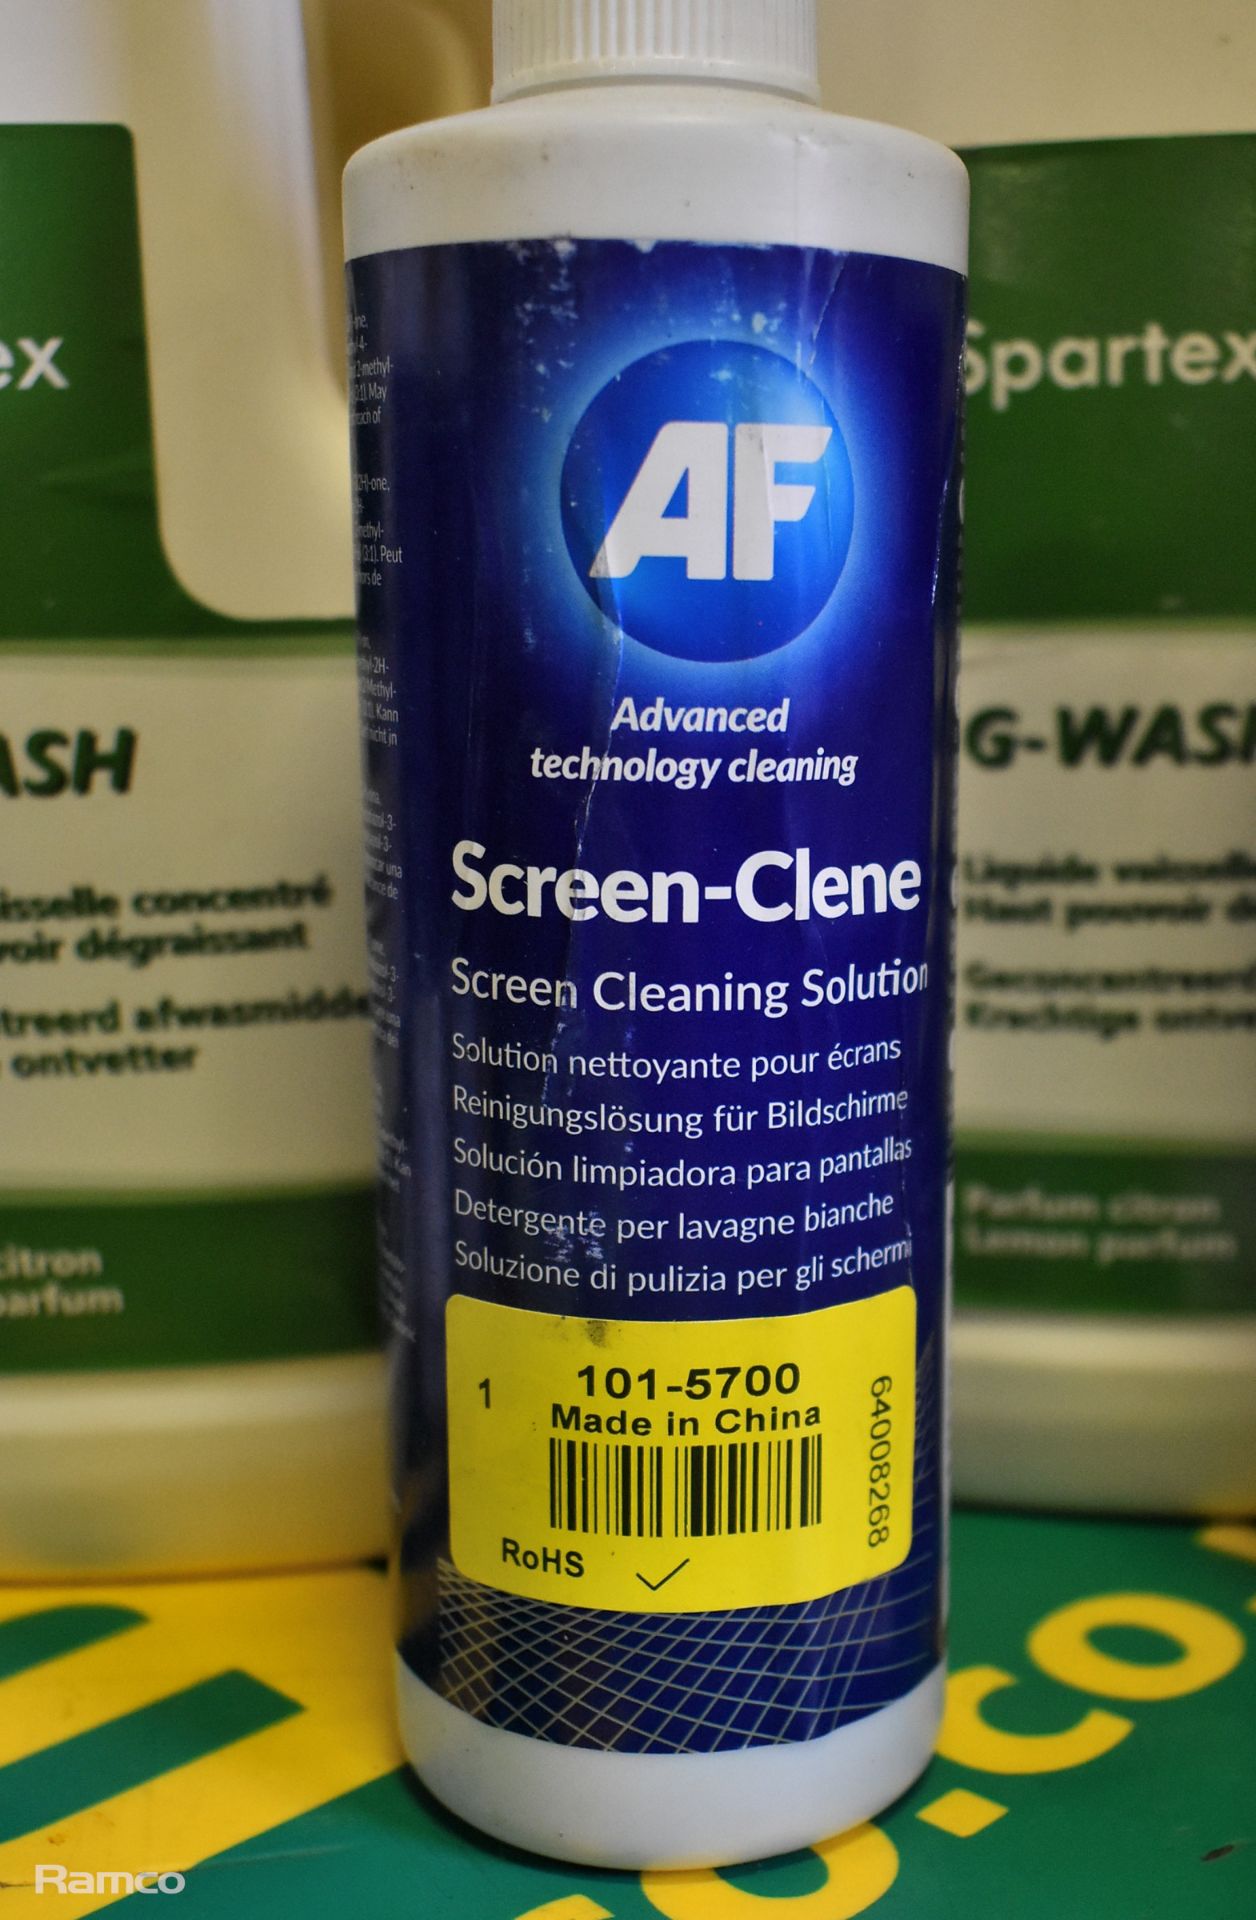 Cleaning products - concentrated dishwashing liquid, screen cleaning solutions and bleached cloths - Bild 4 aus 12